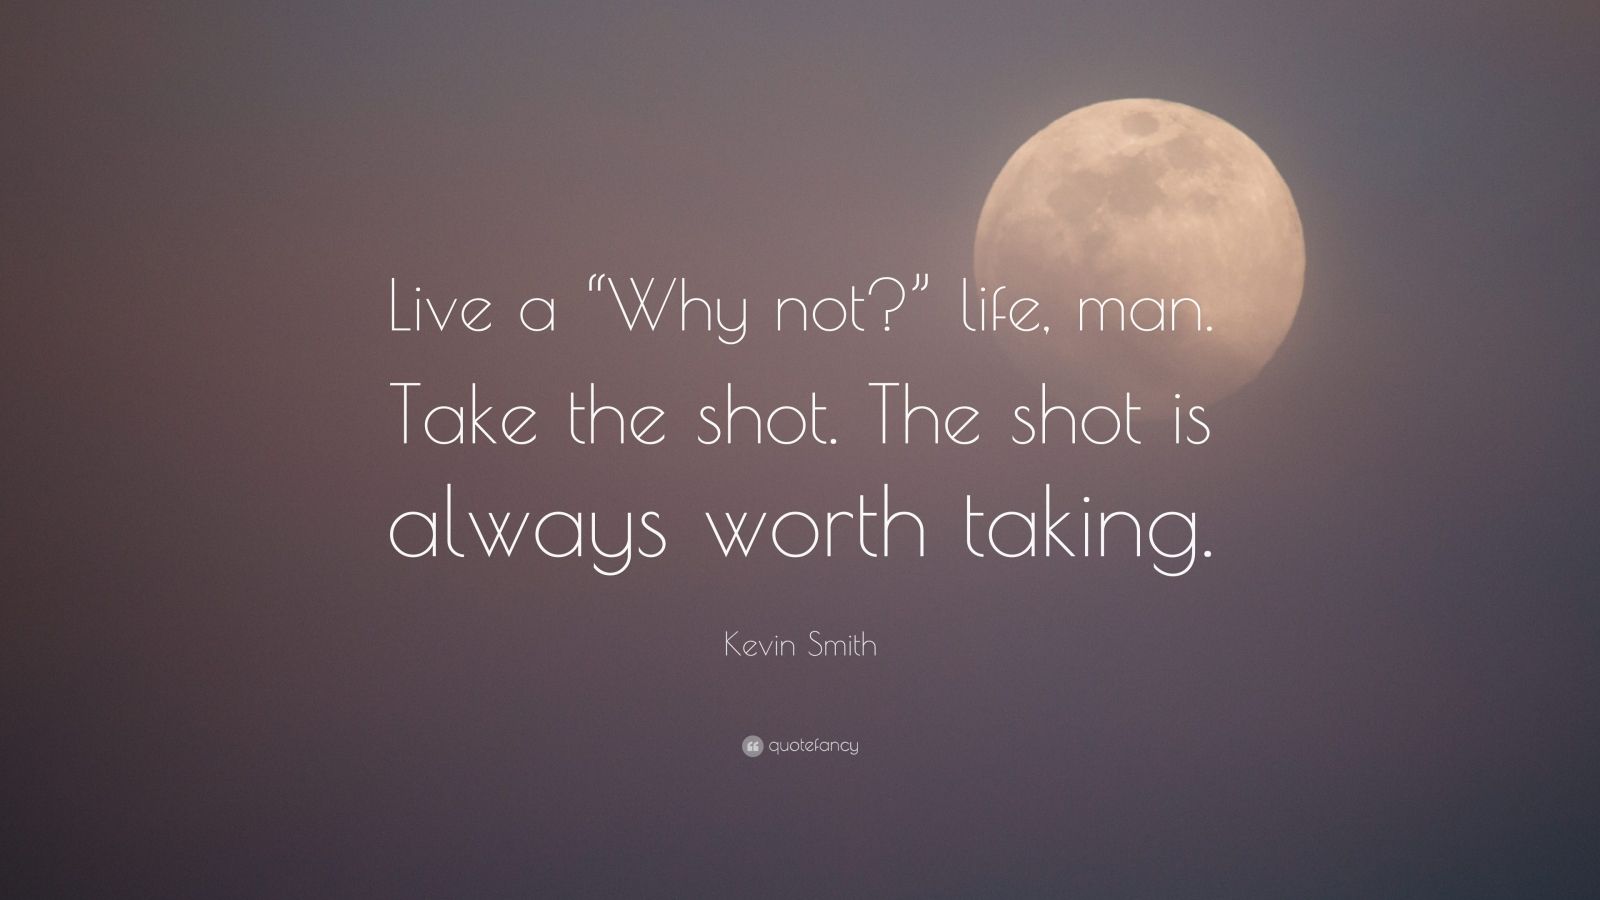 Kevin Smith Quote: “Live a “Why not?” life, man. Take the shot. The ...